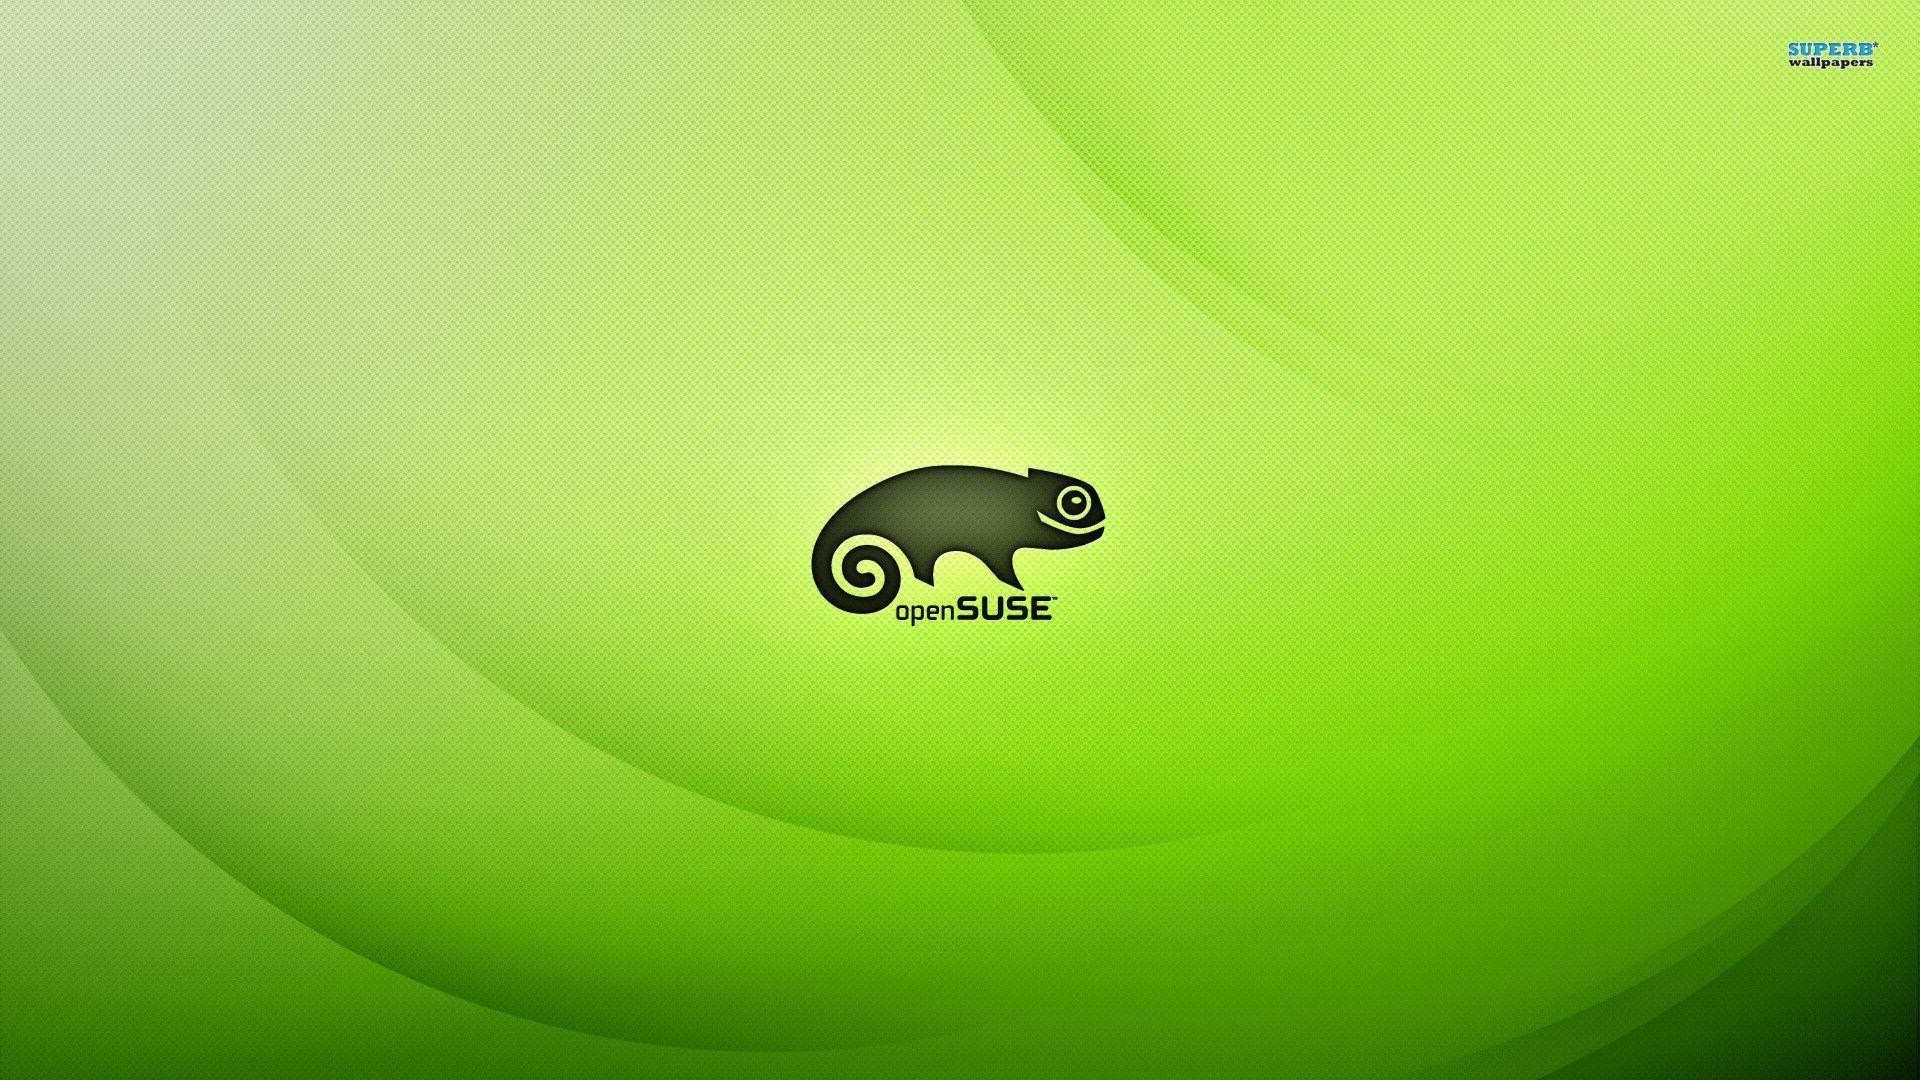 1920x1080 openSUSE wallpaper - Computer wallpapers - #